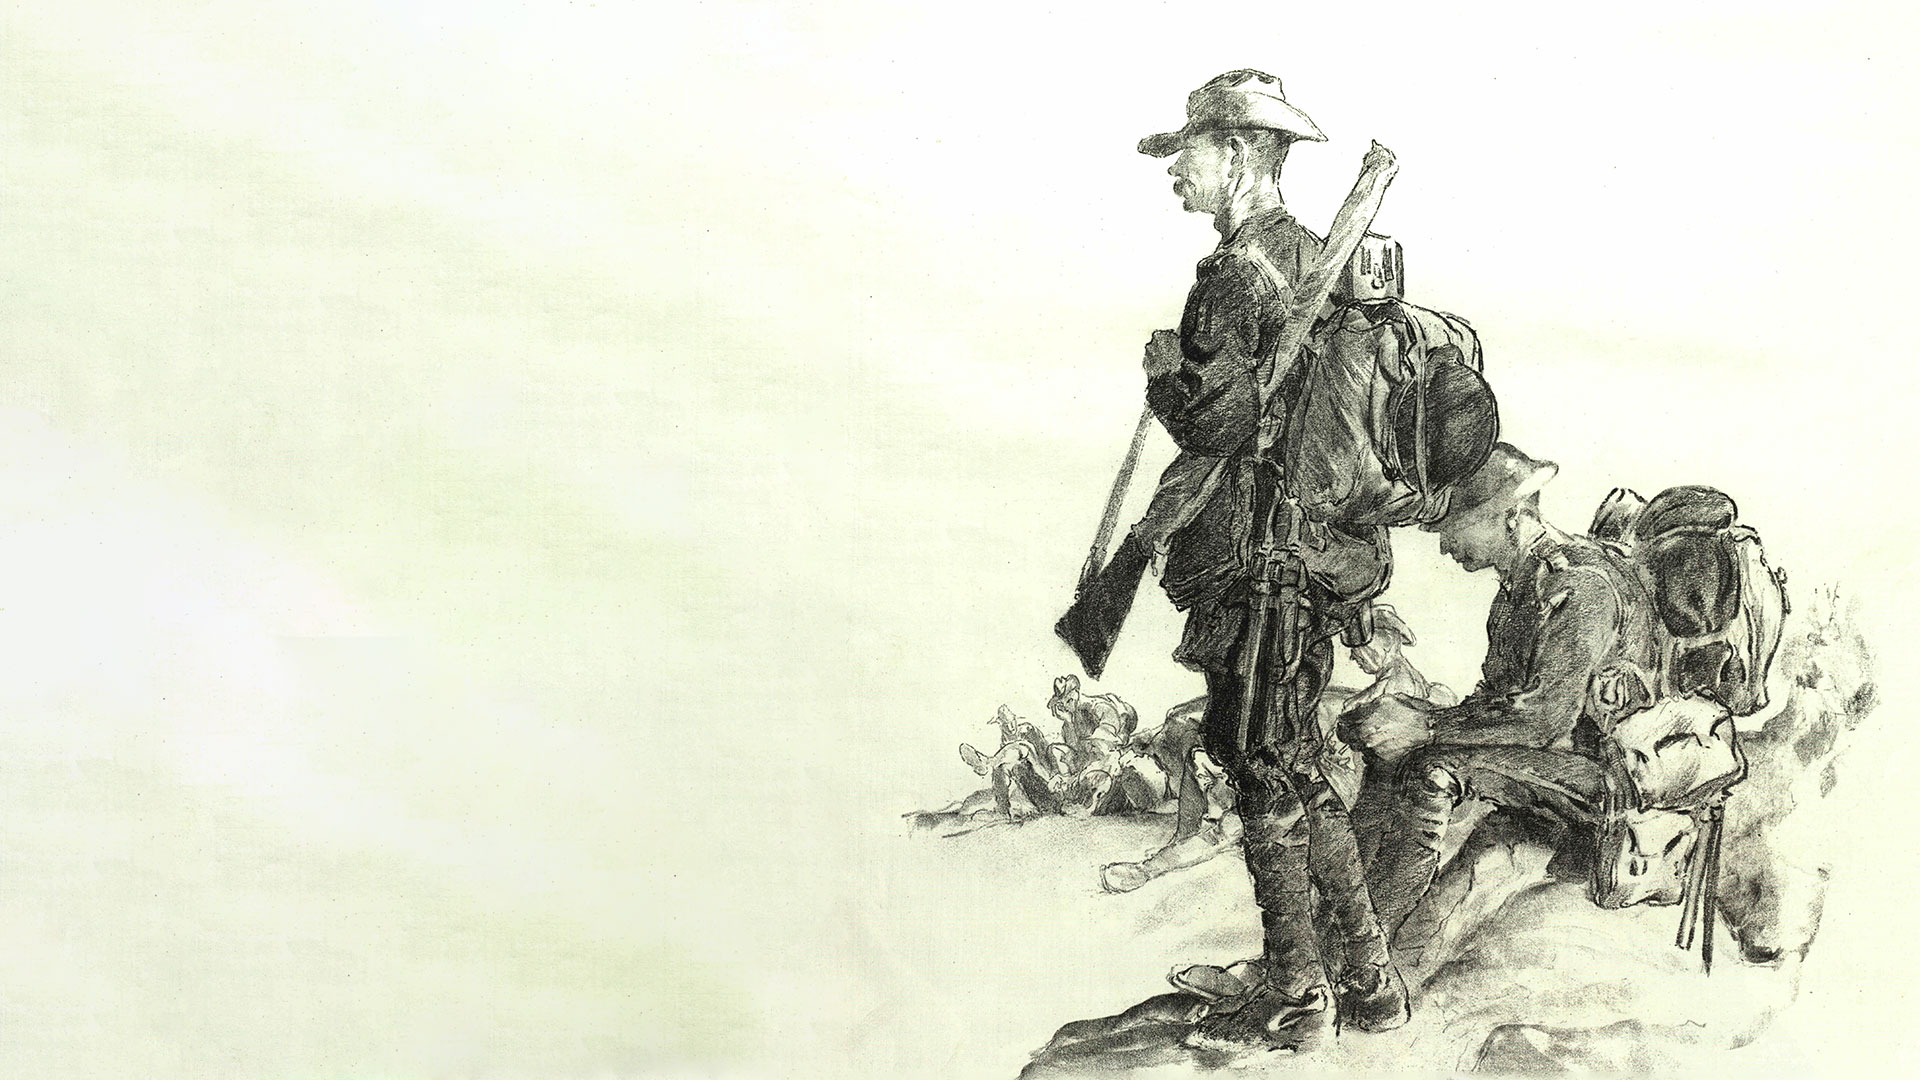 Illustration of WW1 soldiers resting in the field - Dyson 1918